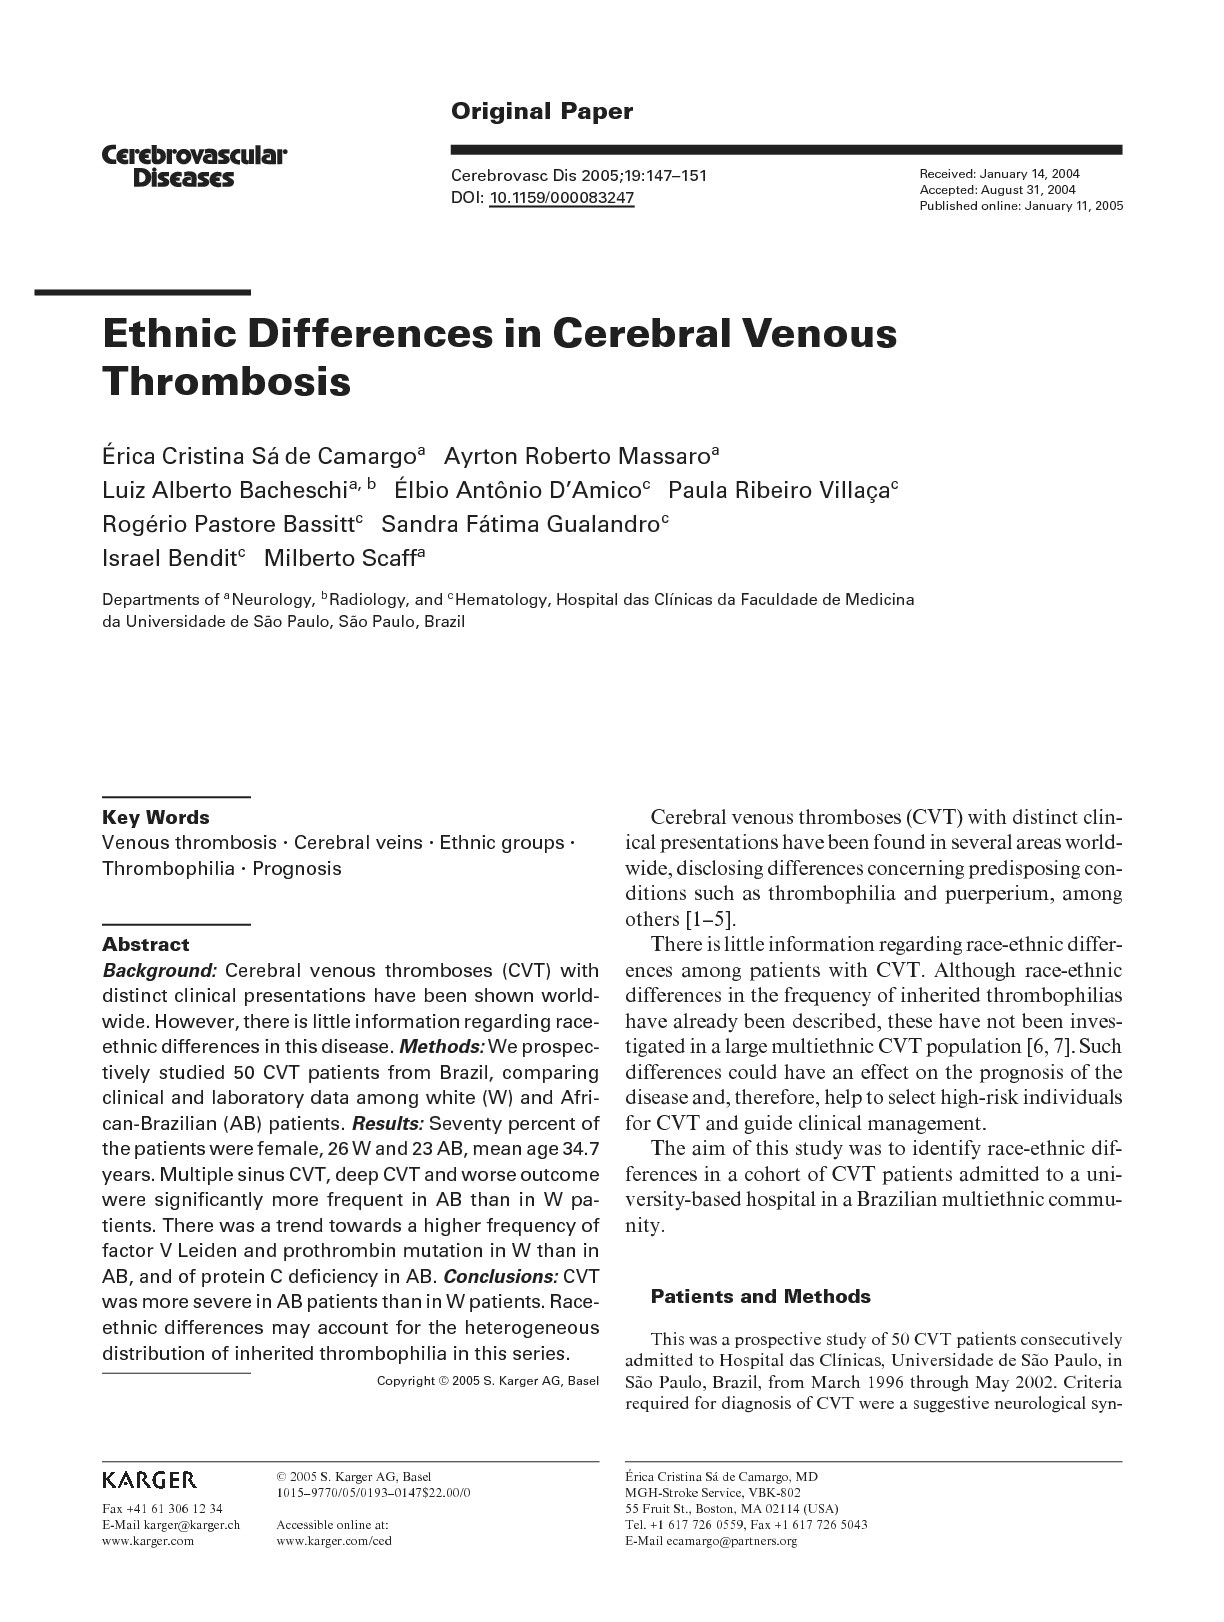 Ethnic Differences in Cerebral Venous Thrombosis